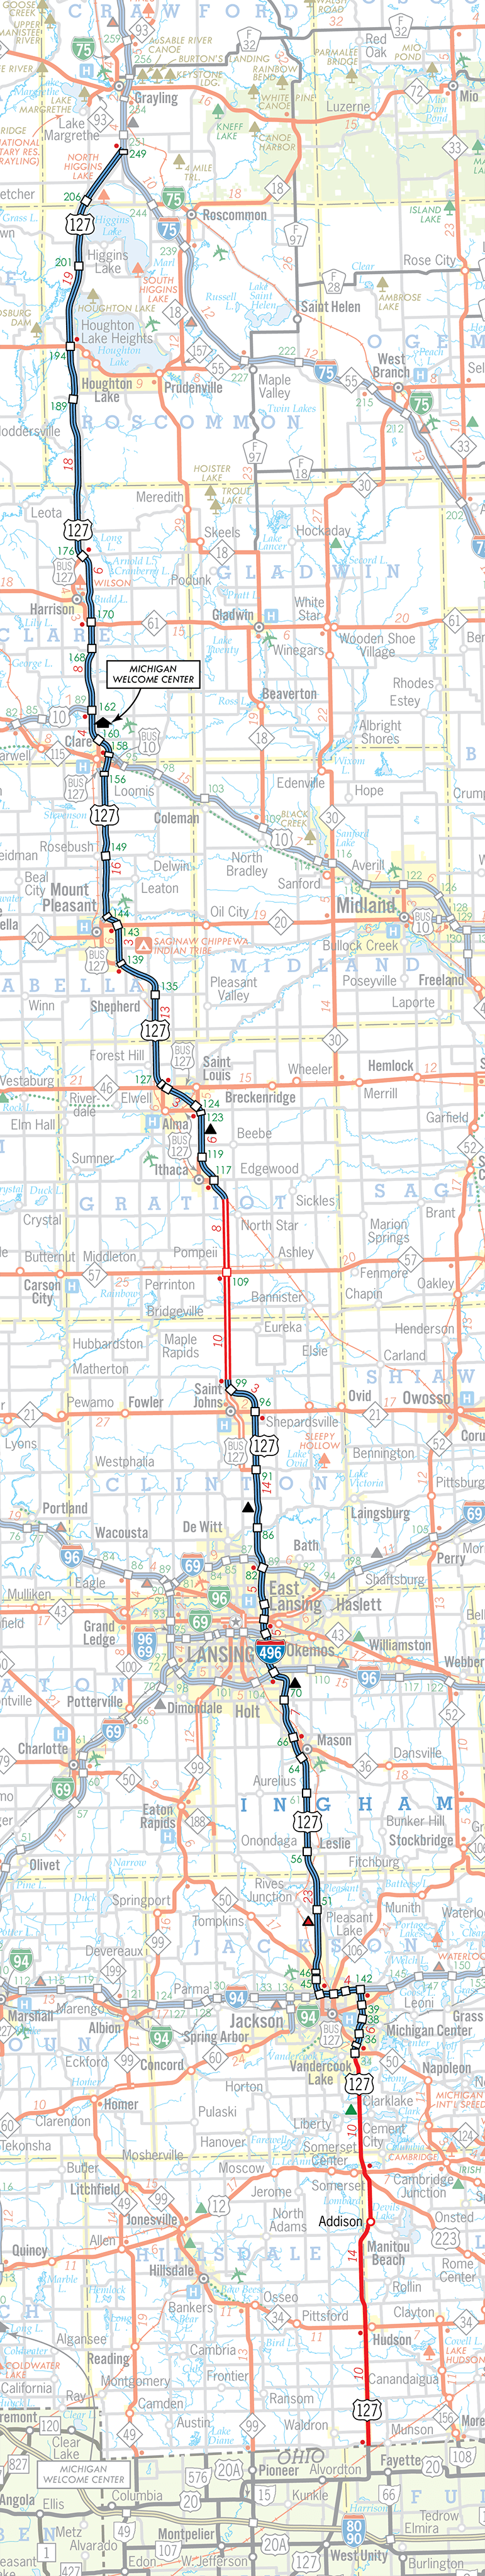 US-127 Route Map